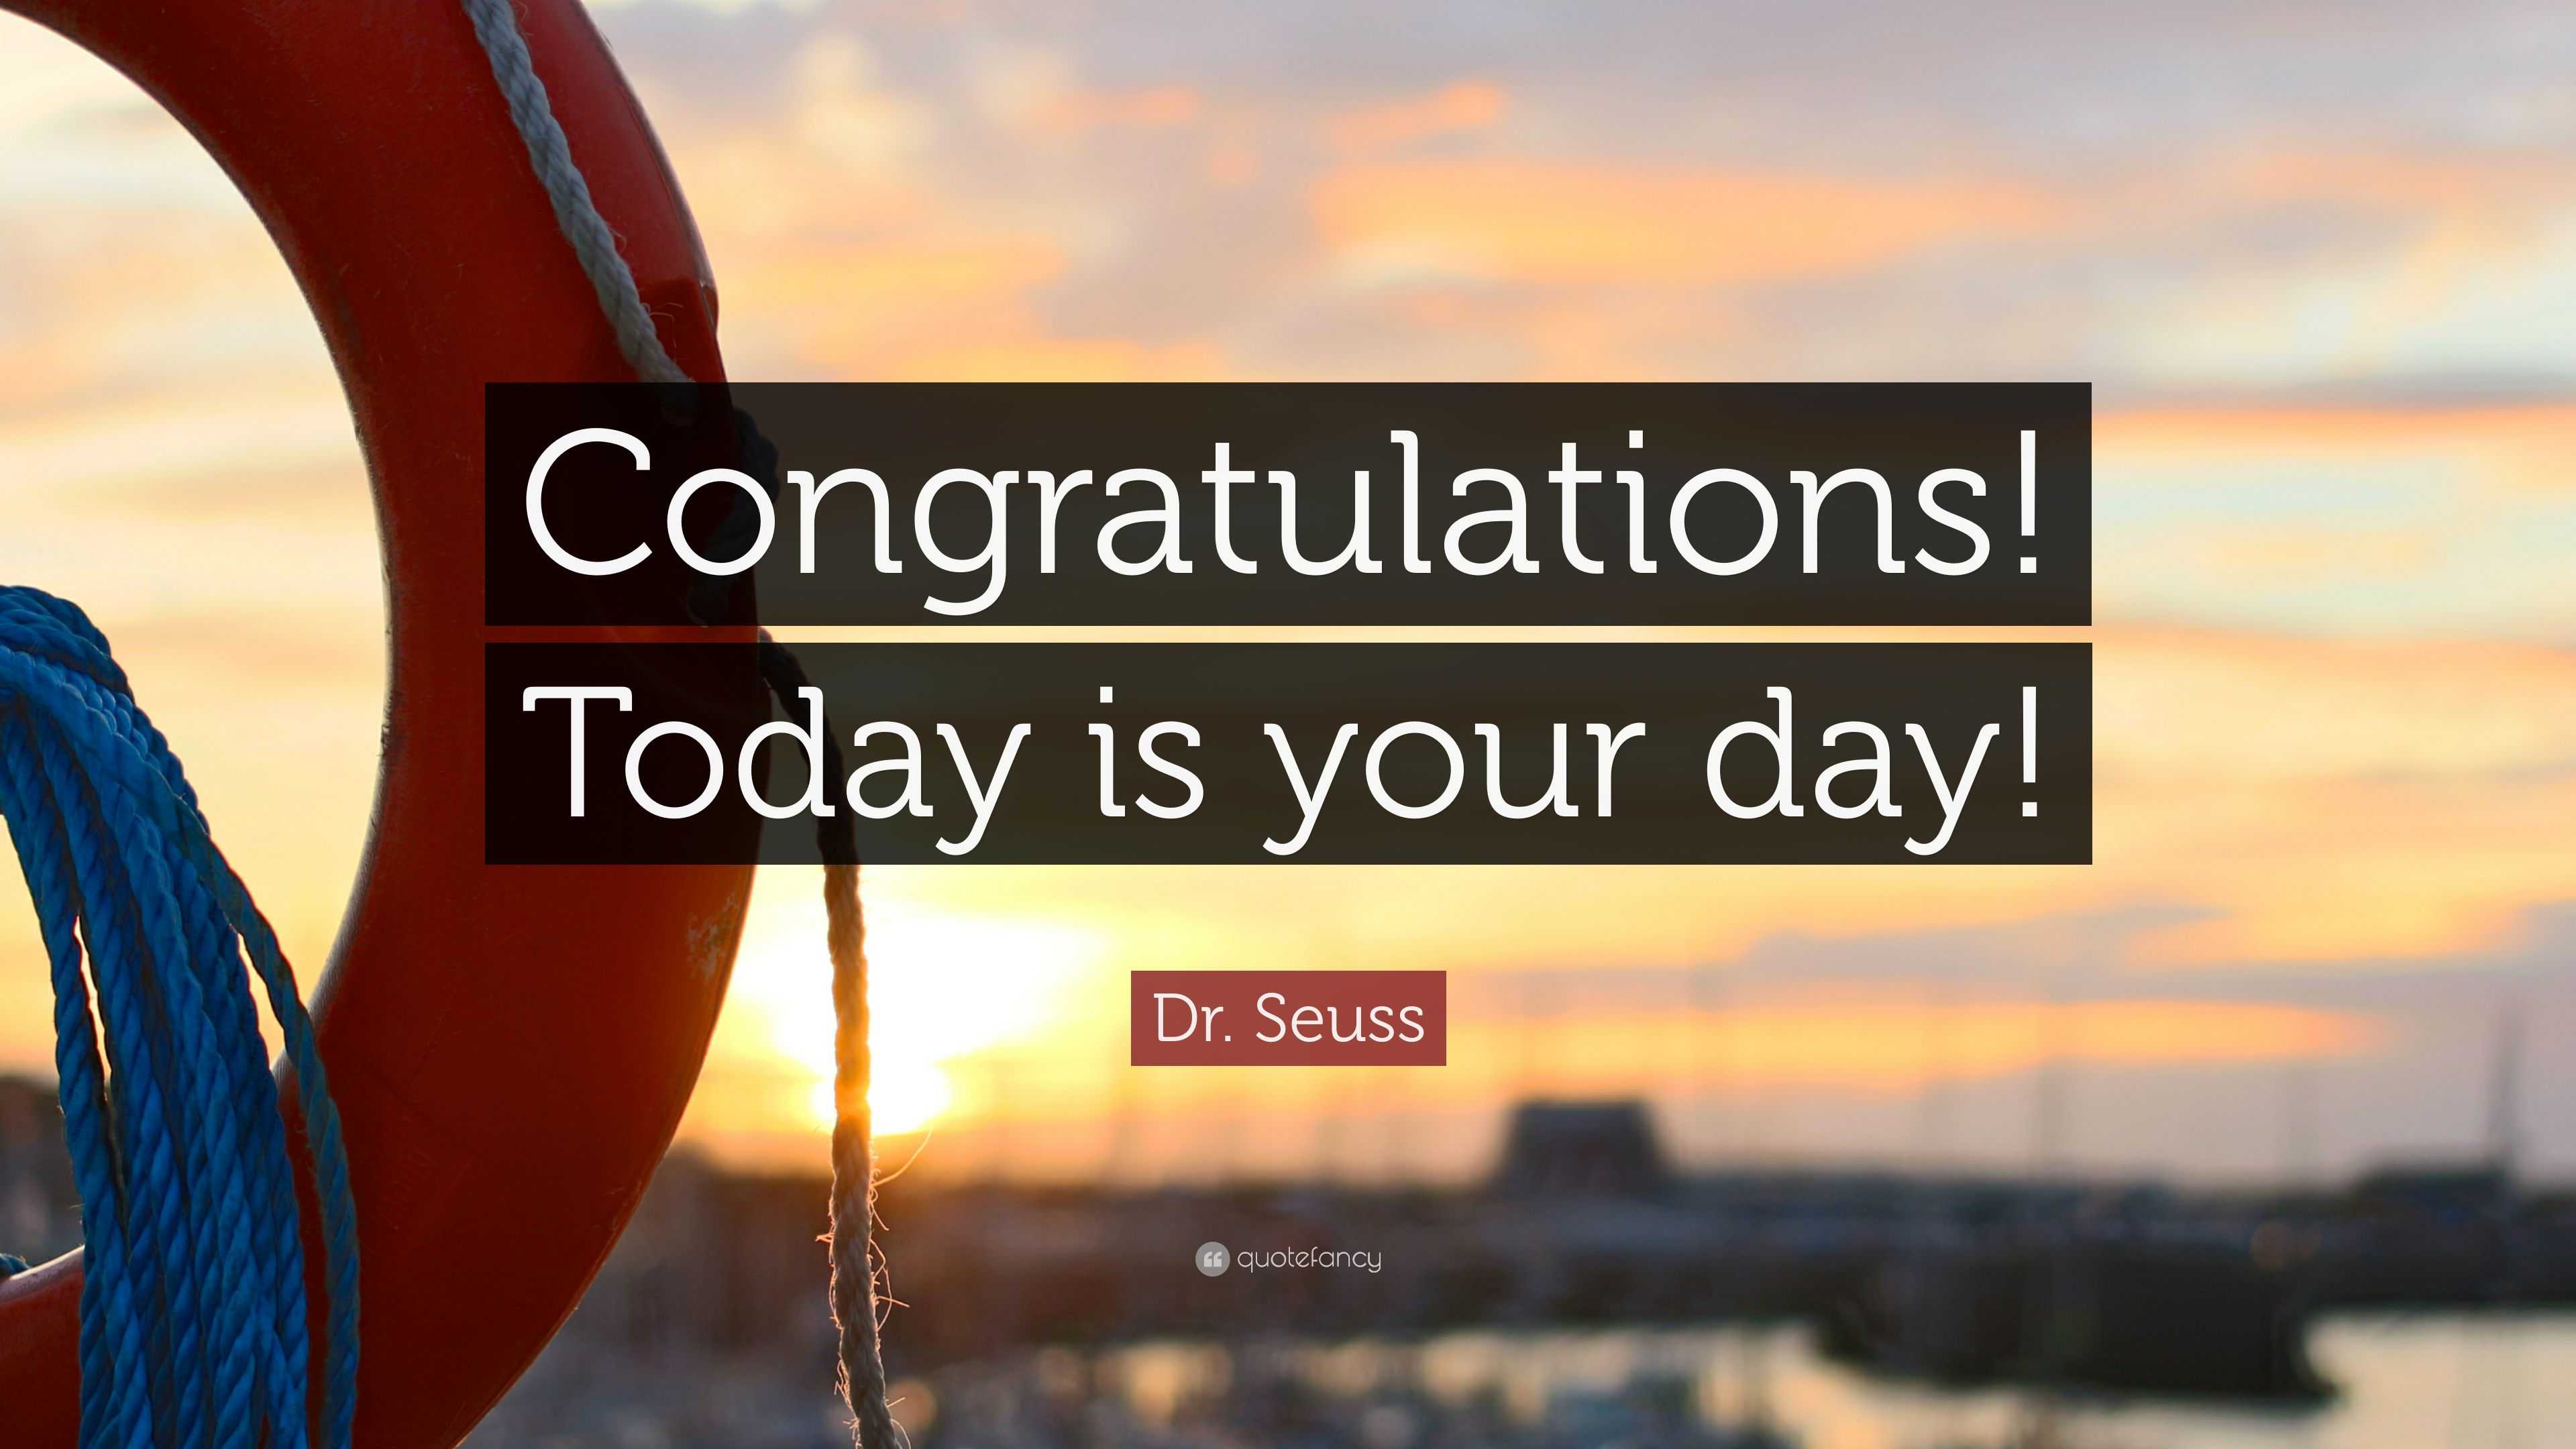 Dr. Seuss Quote: “Congratulations! Today is your day!” (12 wallpapers